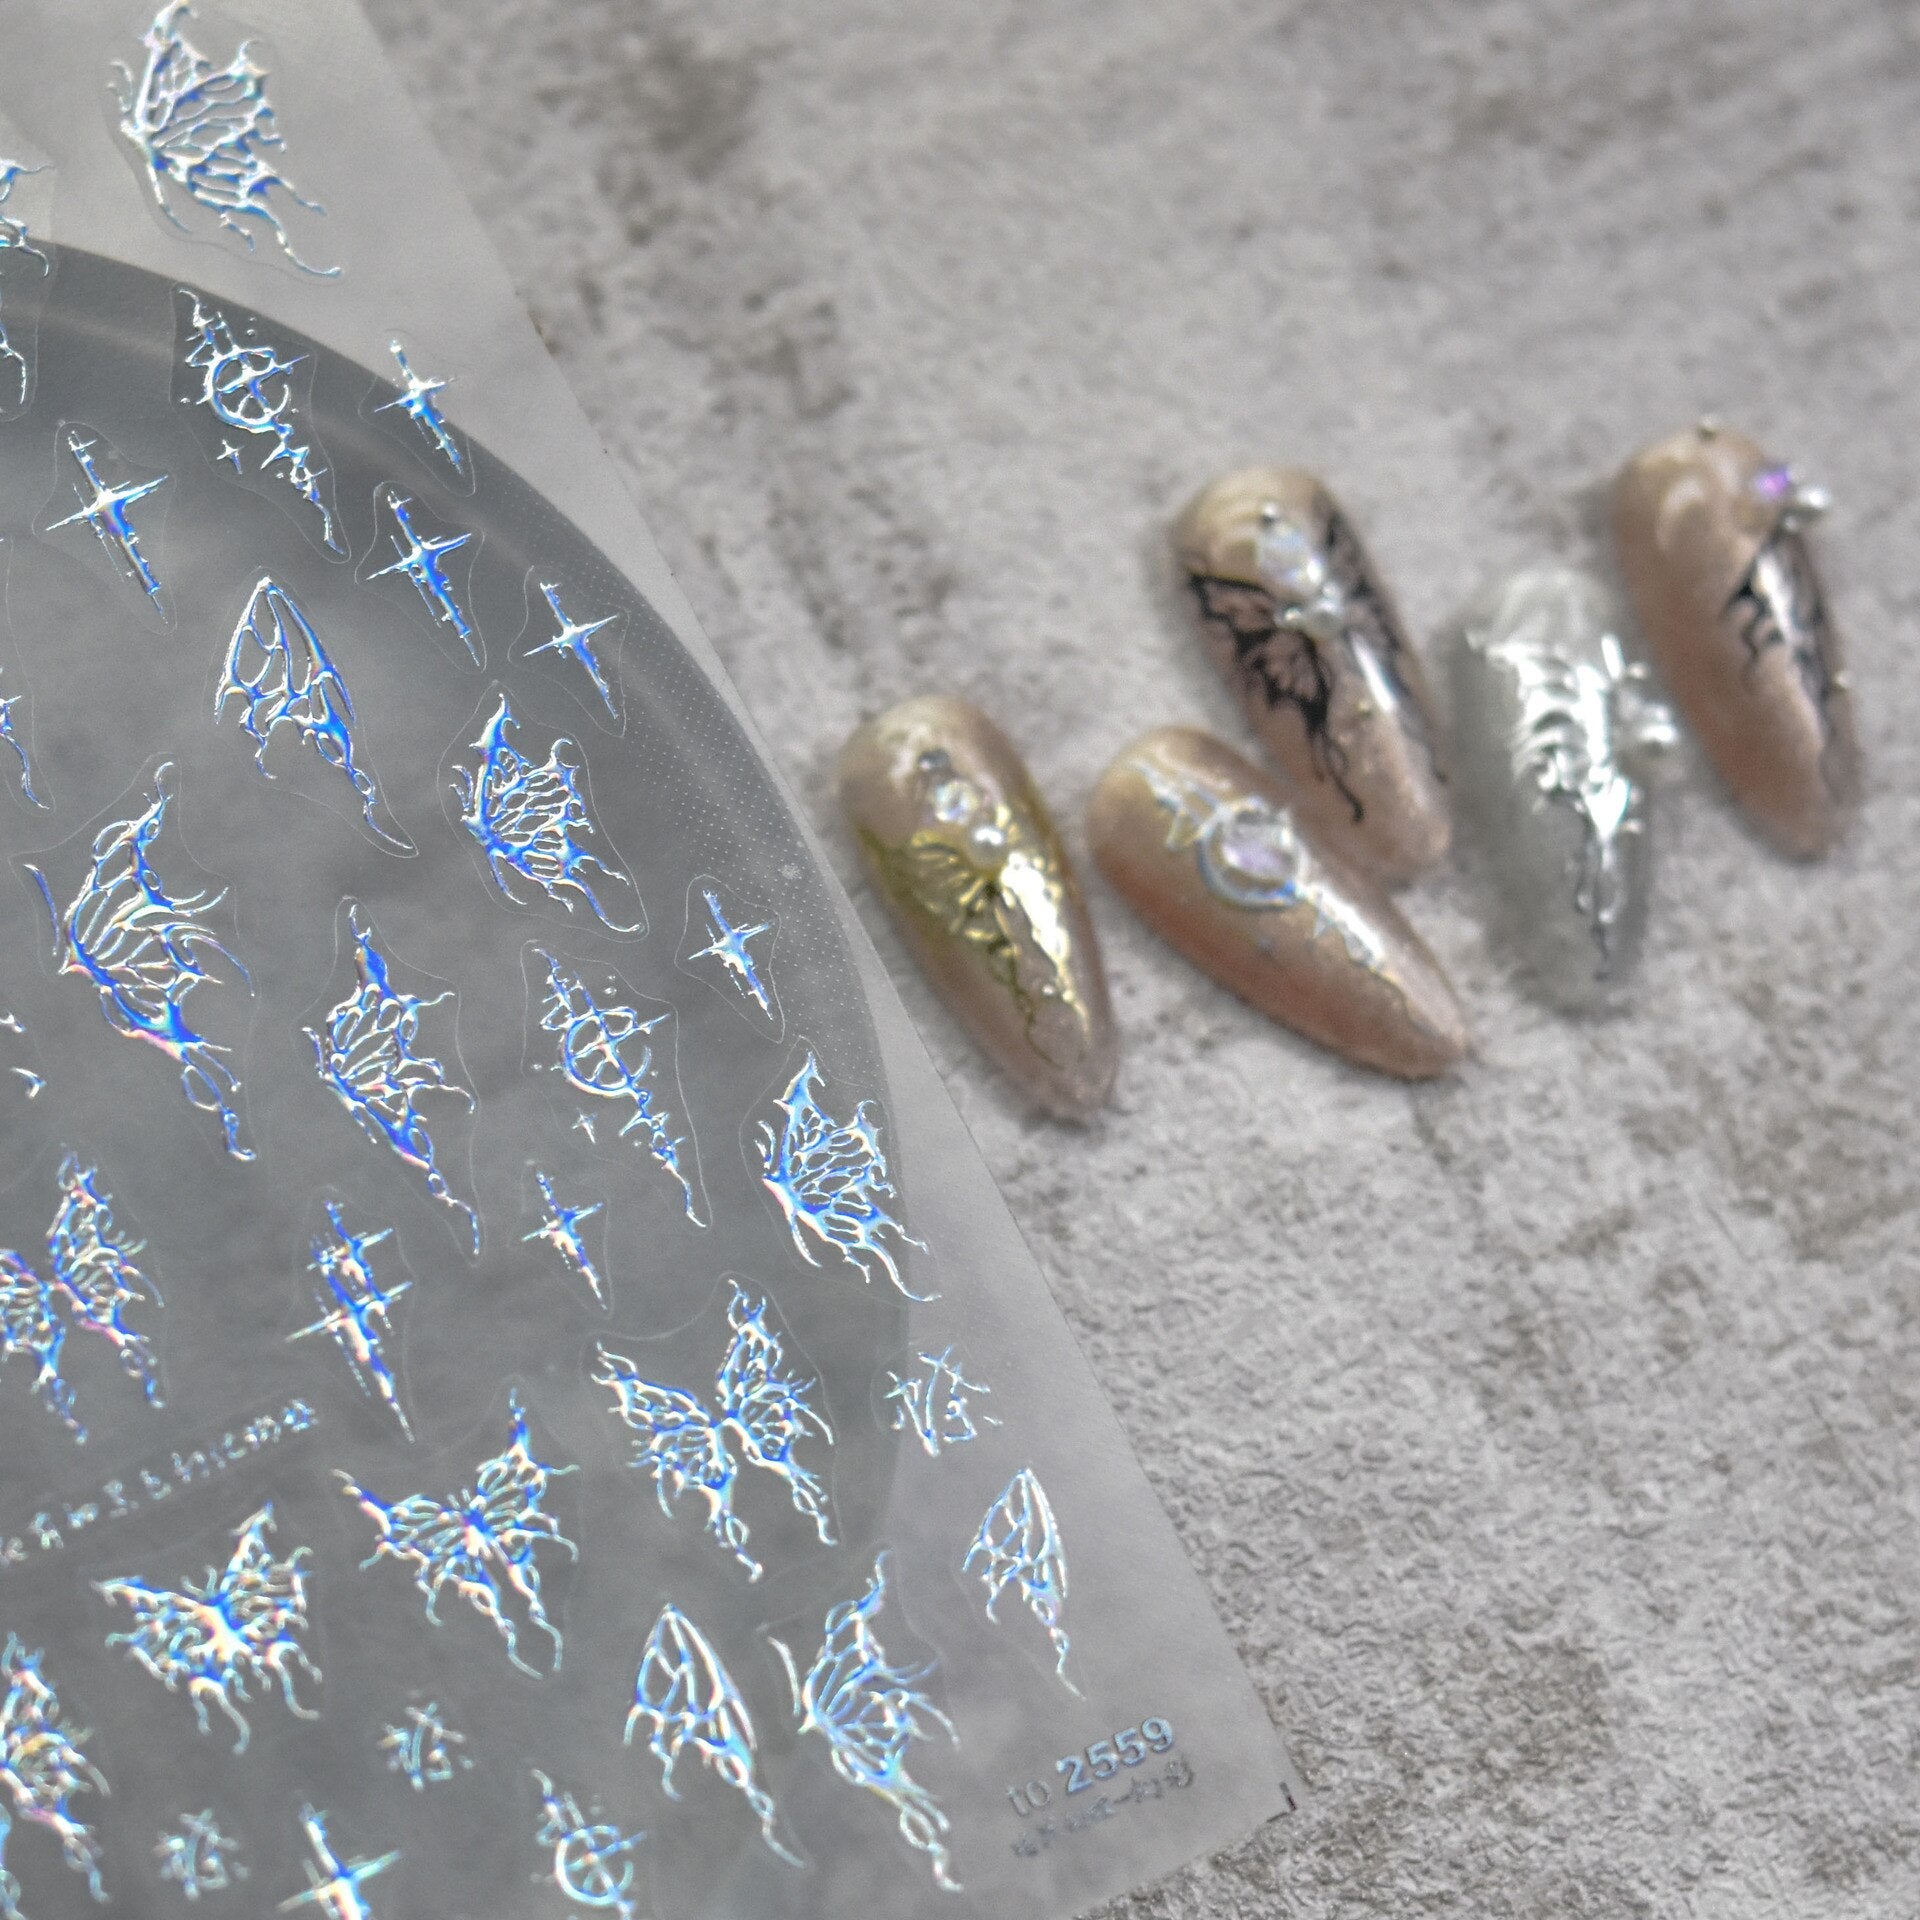 Flytonn Gold Silver Butterfly New Bronzing High Quality Adhesive Gilded Nail Stickers Nail Art Decorations Nail Decals Design T-2559